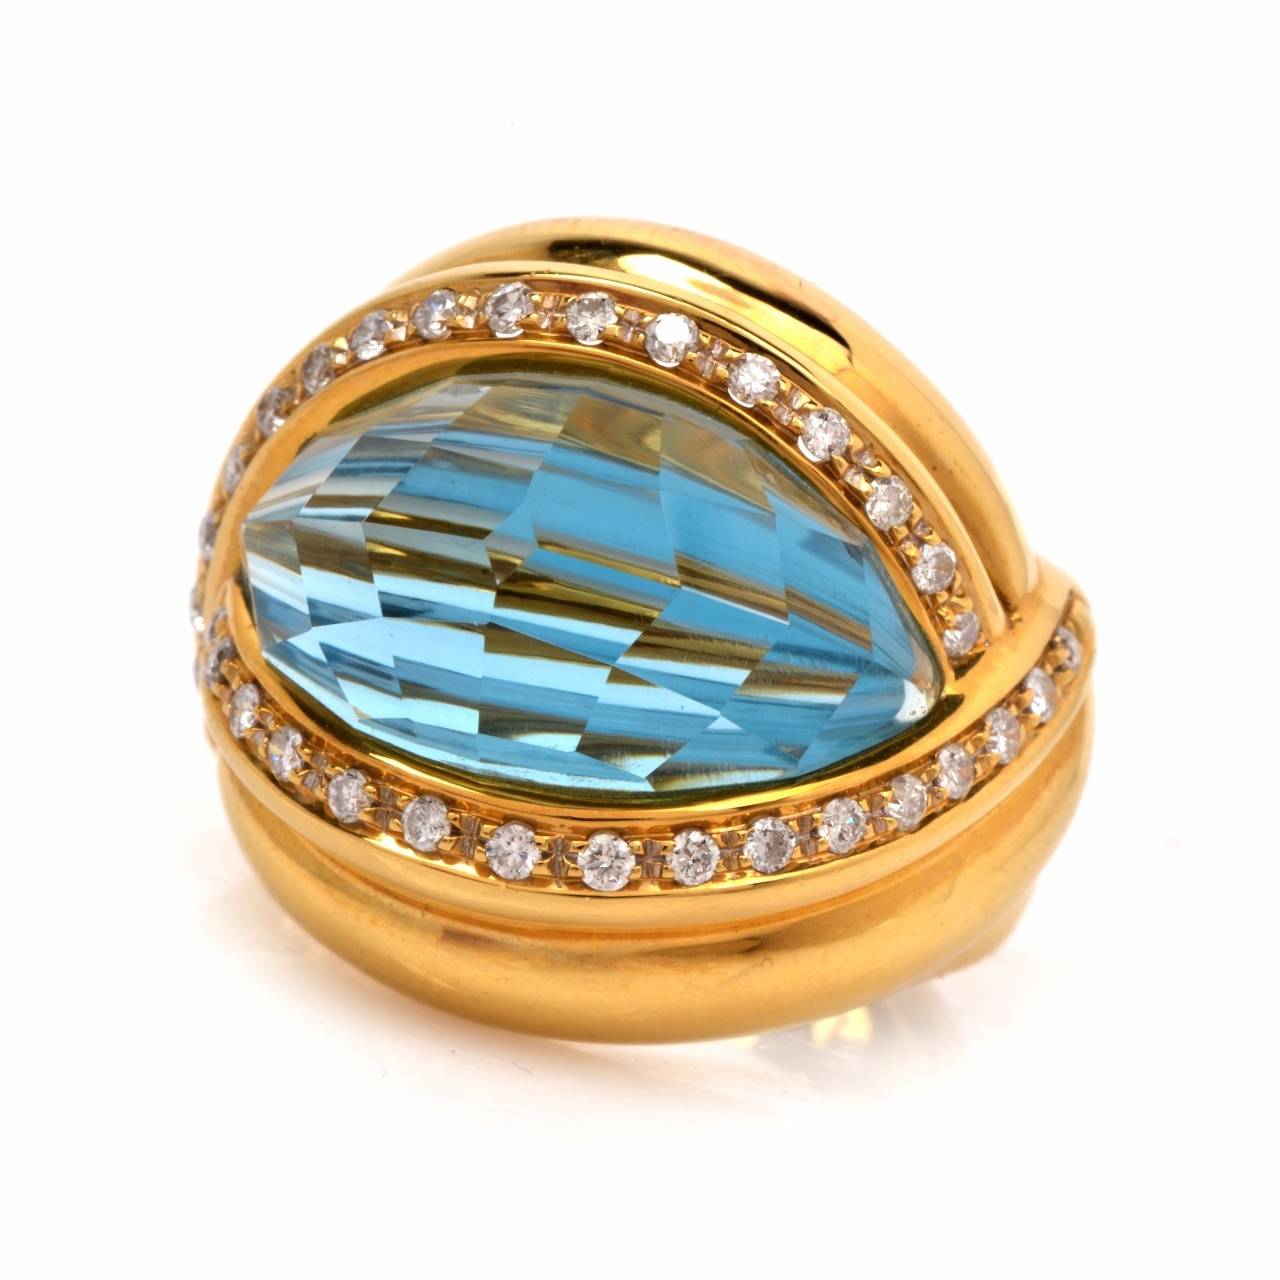 This estate Italian made cocktail ring crafted in solid 18K yellow gold weighs 15.5 grams.  Designed as an impressive dome-shaped ring, this vivacious ring exposes a 11.50 cts ct  faceted convex blue topaz positioned between delicate diamond-studded